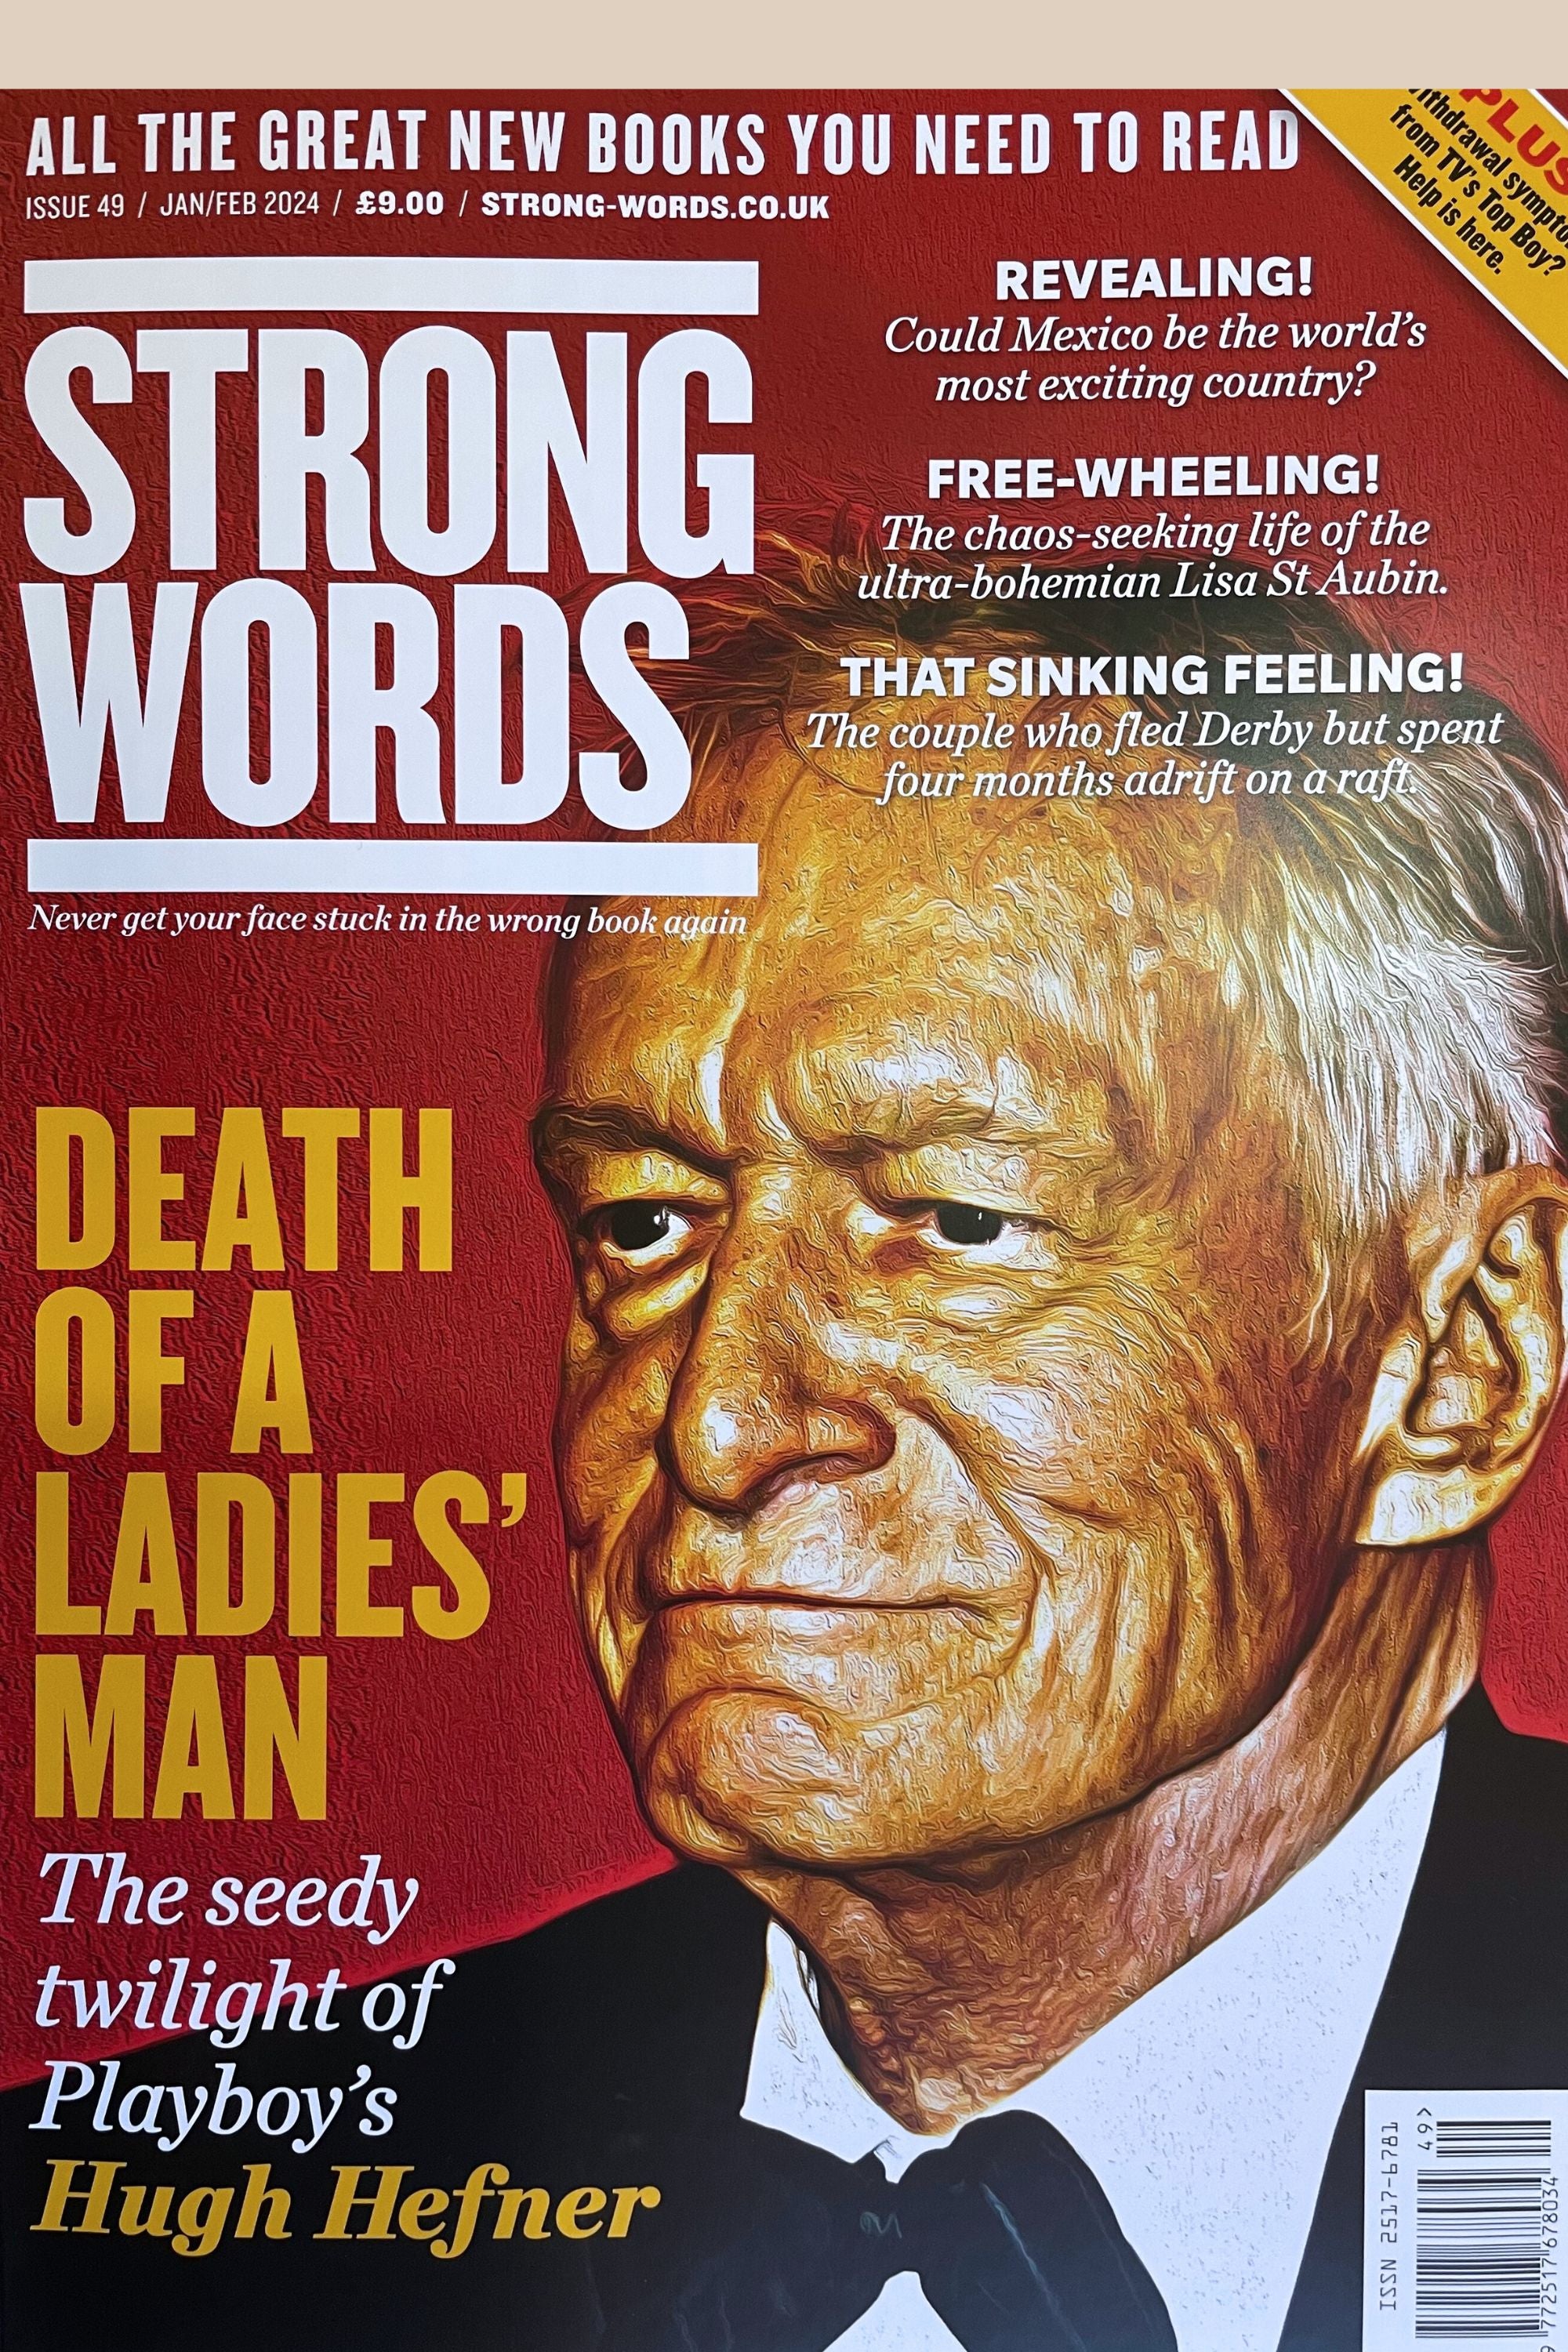 Strong Words Magazine Issue 49 cover with Hugh Heffner